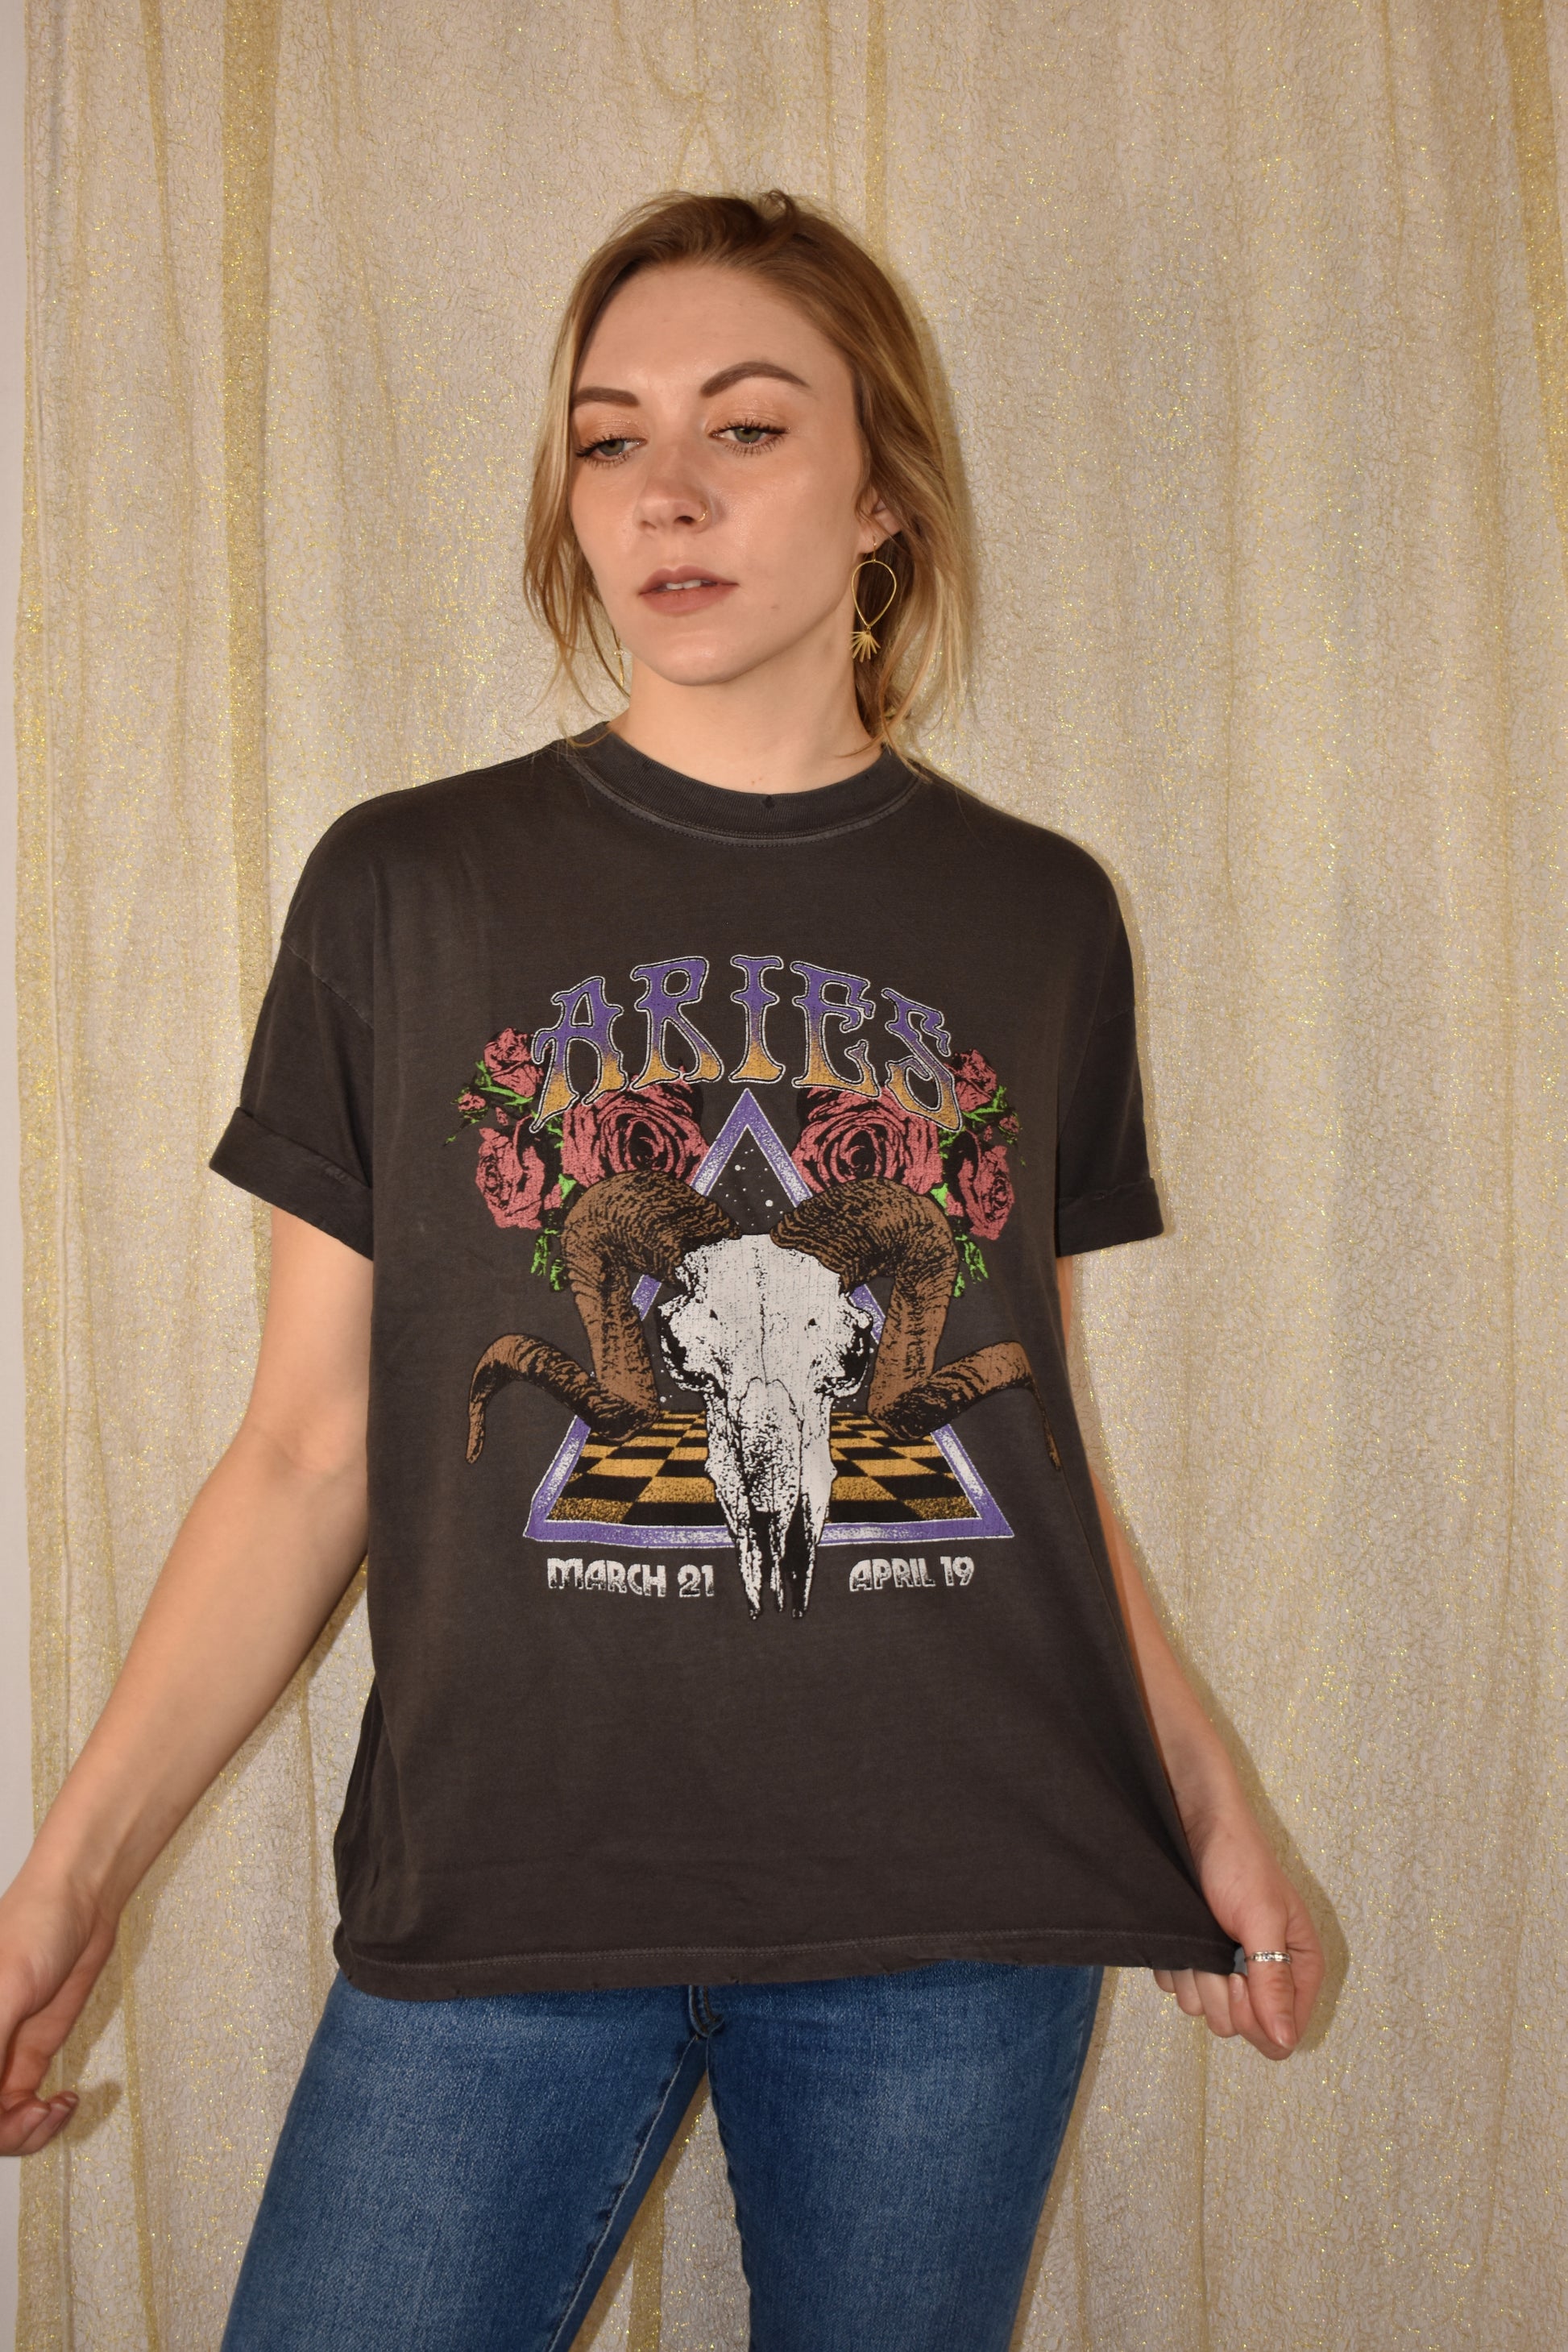 slightly oversized zodiac tee with grungy design and cuffed short sleeves. tshirt color is dark gray